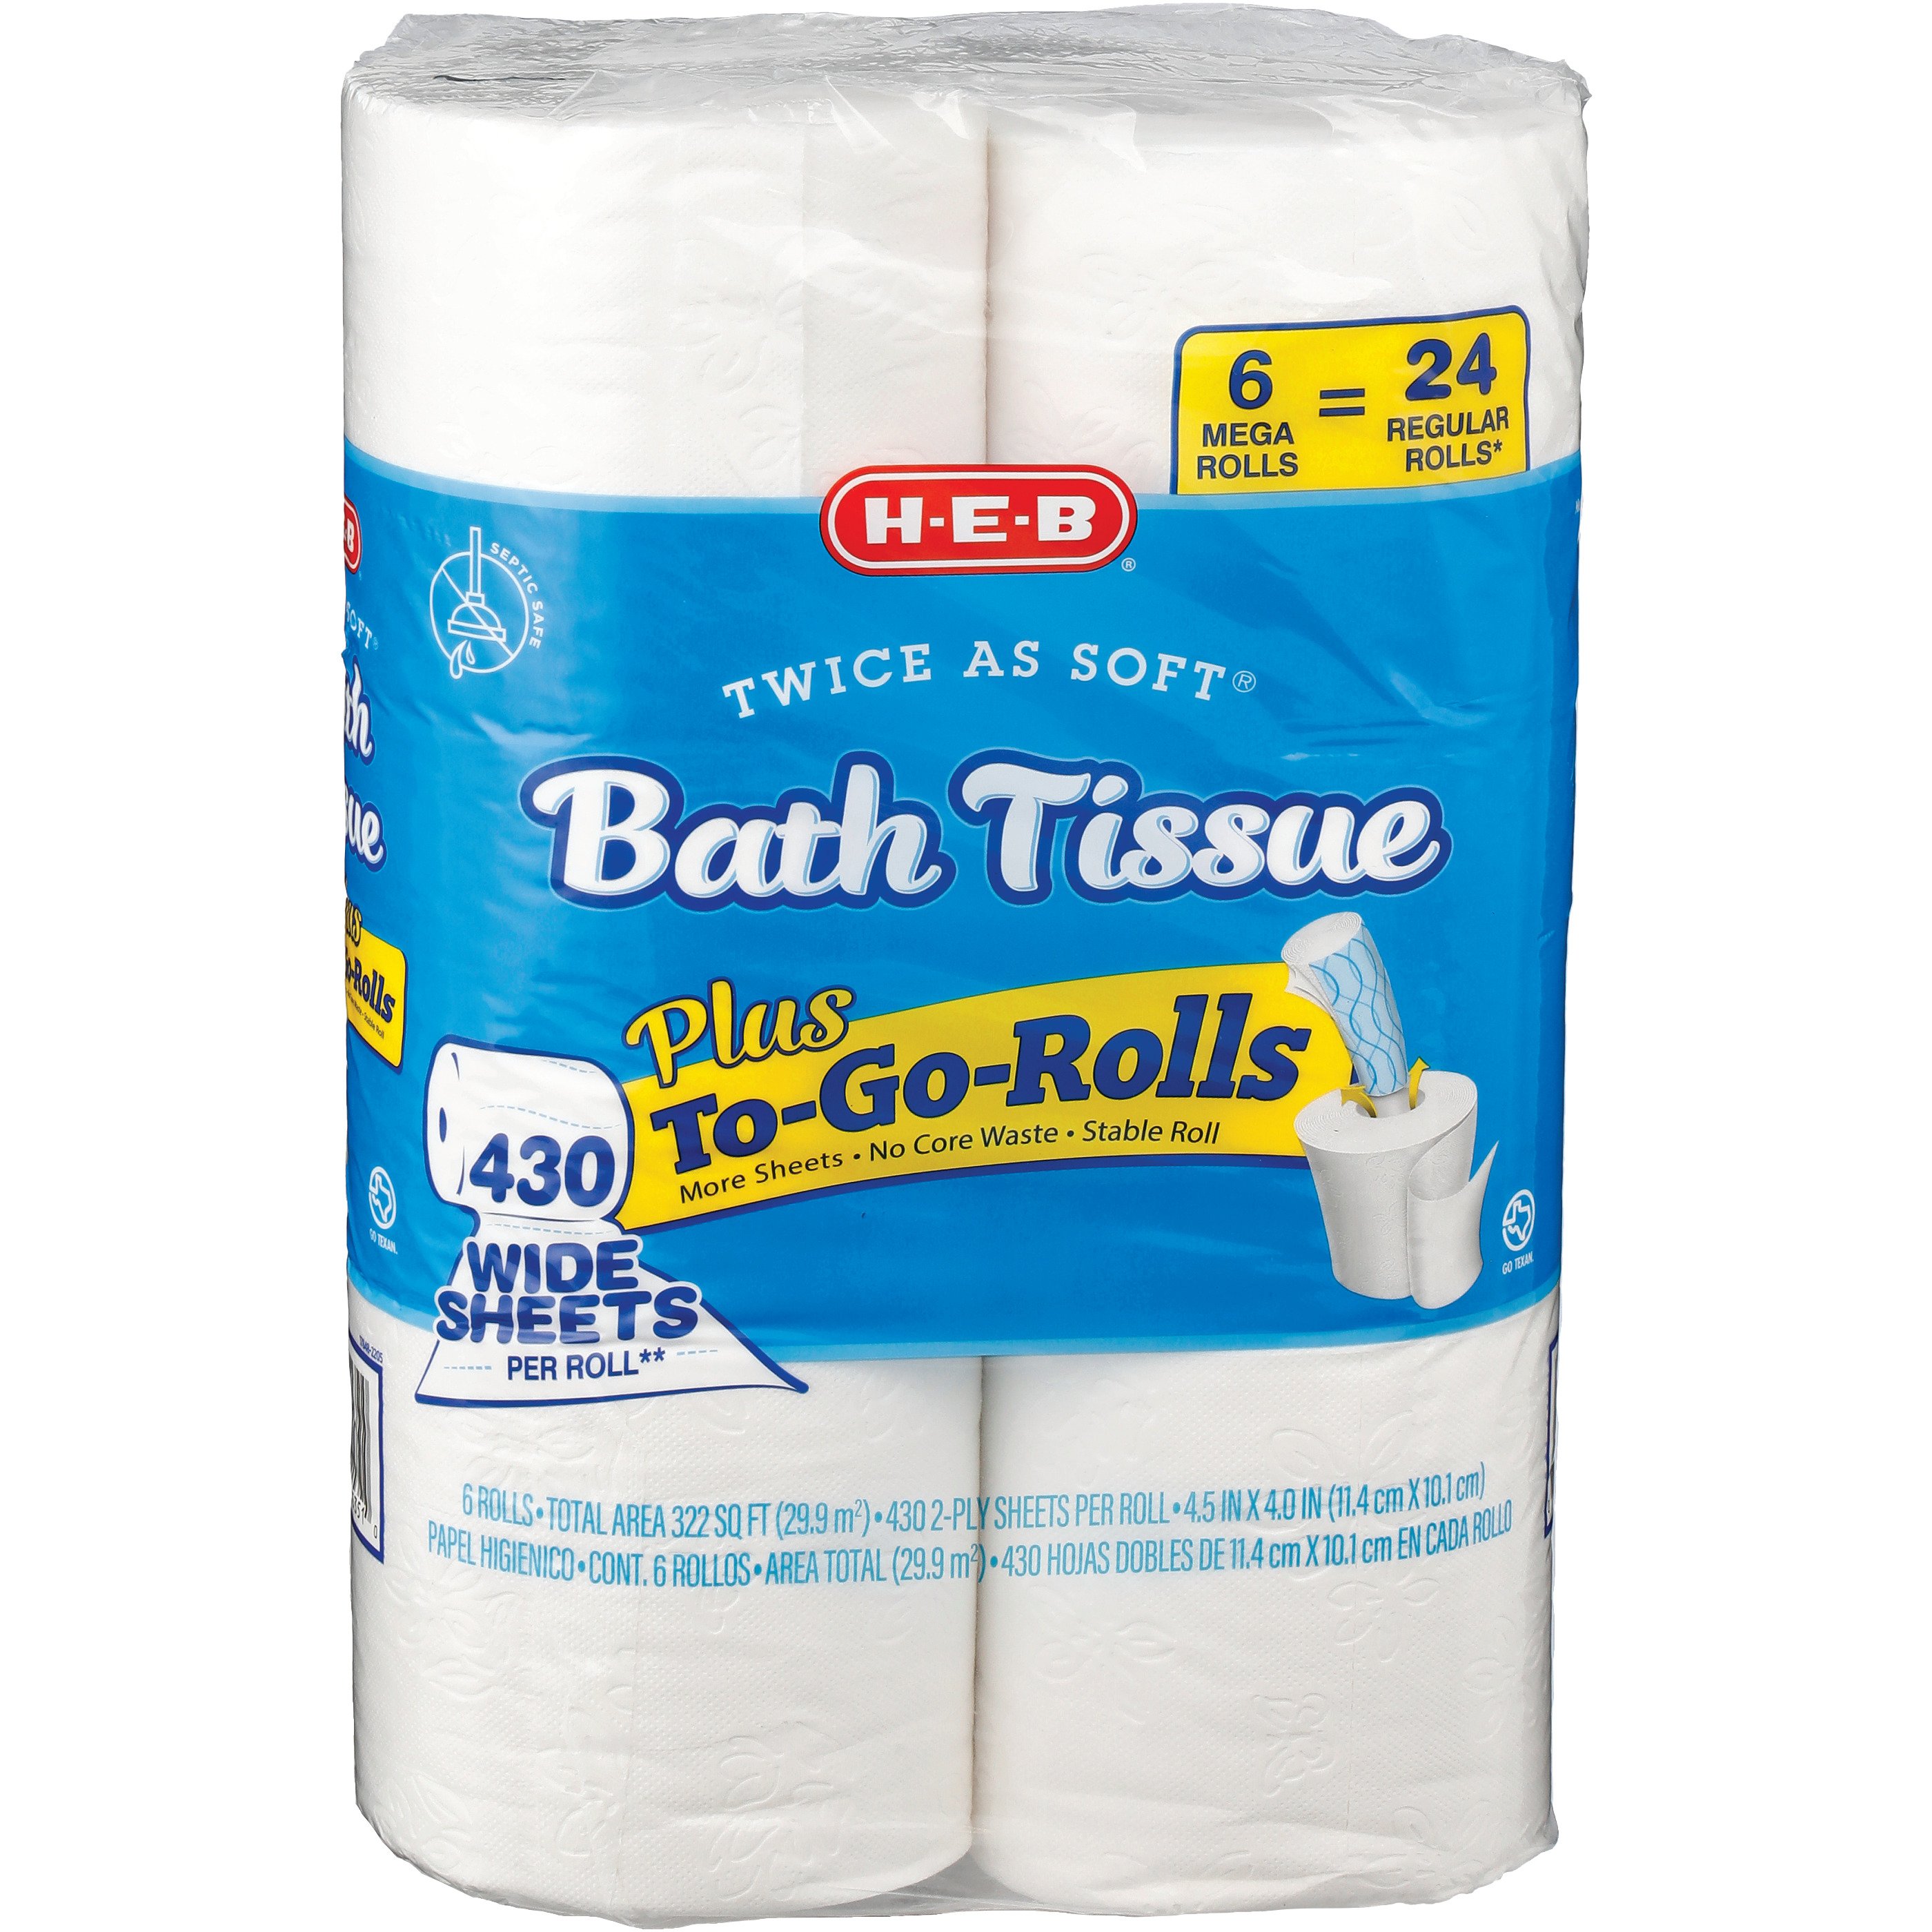 H-E-B Twice As Soft To-Go-Rolls Toilet Paper - Shop Toilet Paper at H-E-B